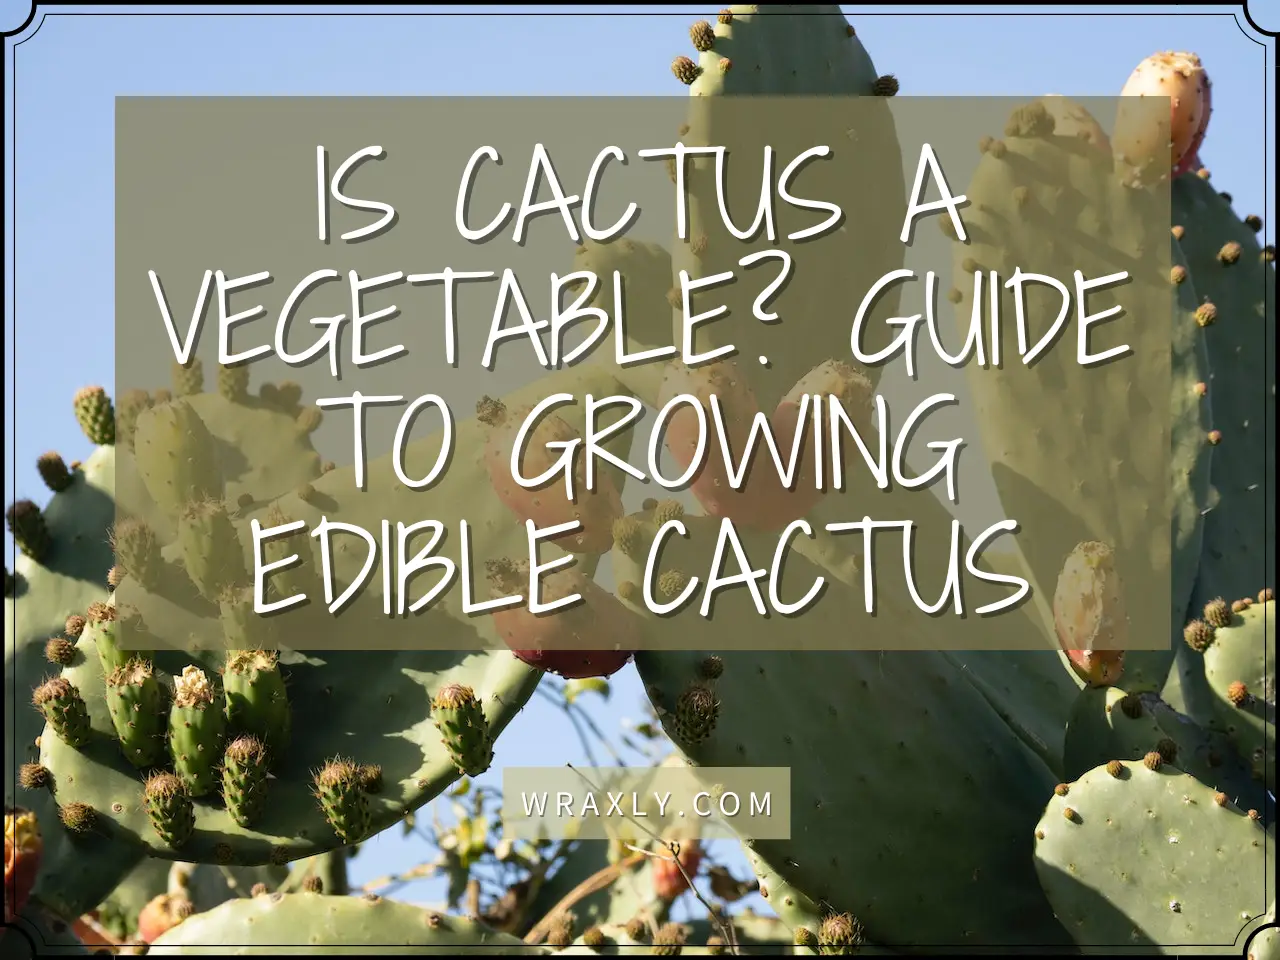 Is Cactus a Vegetable Guide to Growing Edible Cactus